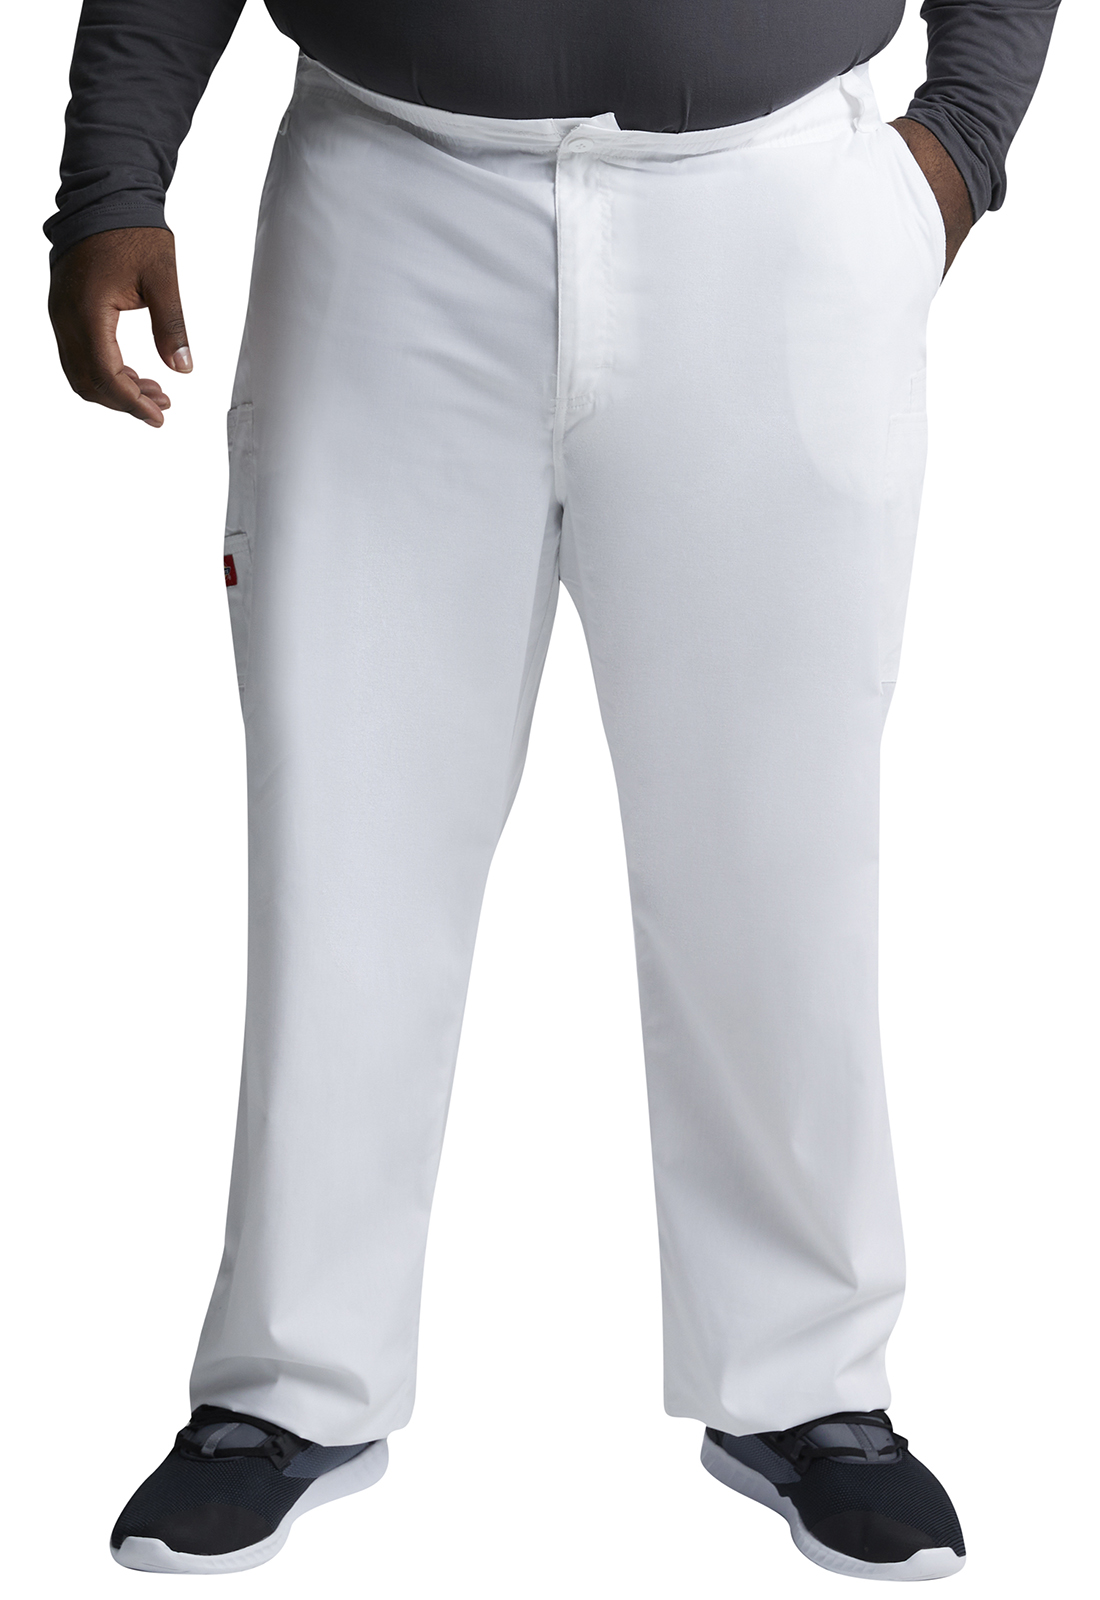 Scrubs Dickies Men's Tall Zip Fly Pull-On Pant 81006T GBWZ Galaxy Free Shipping 